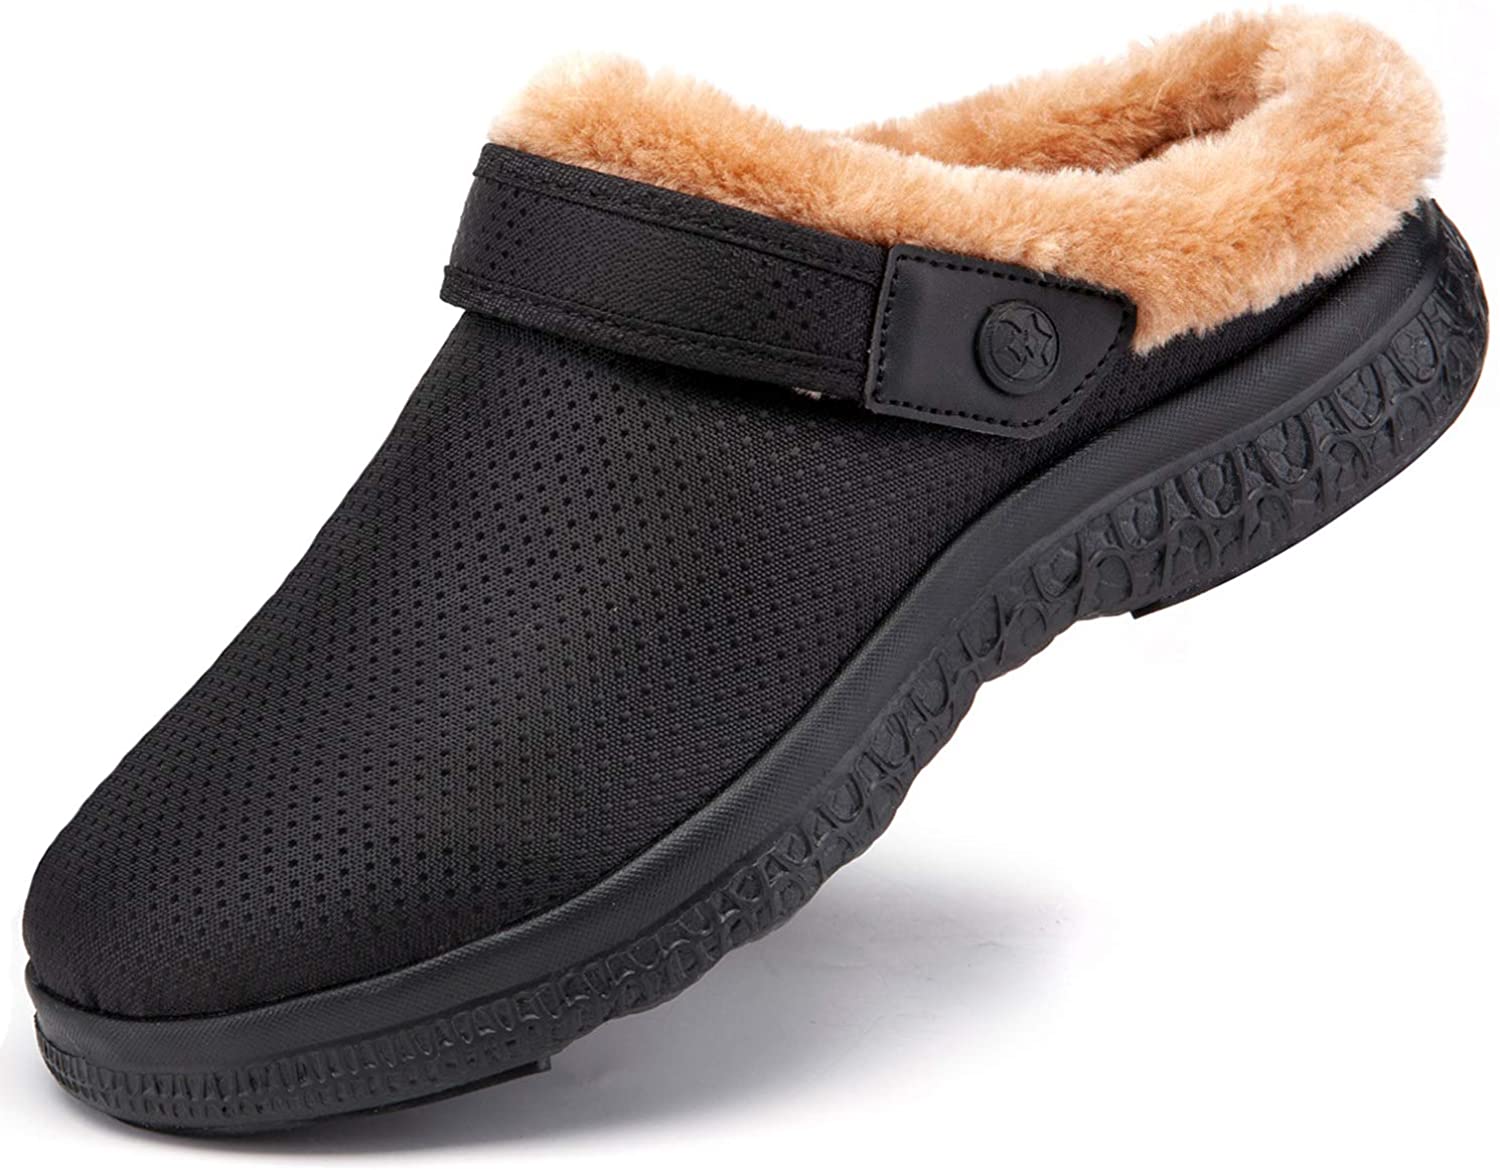 Waterproof Slippers Furry Lined Clogs Winter Home Shoes Warm Fur House Mules-UK